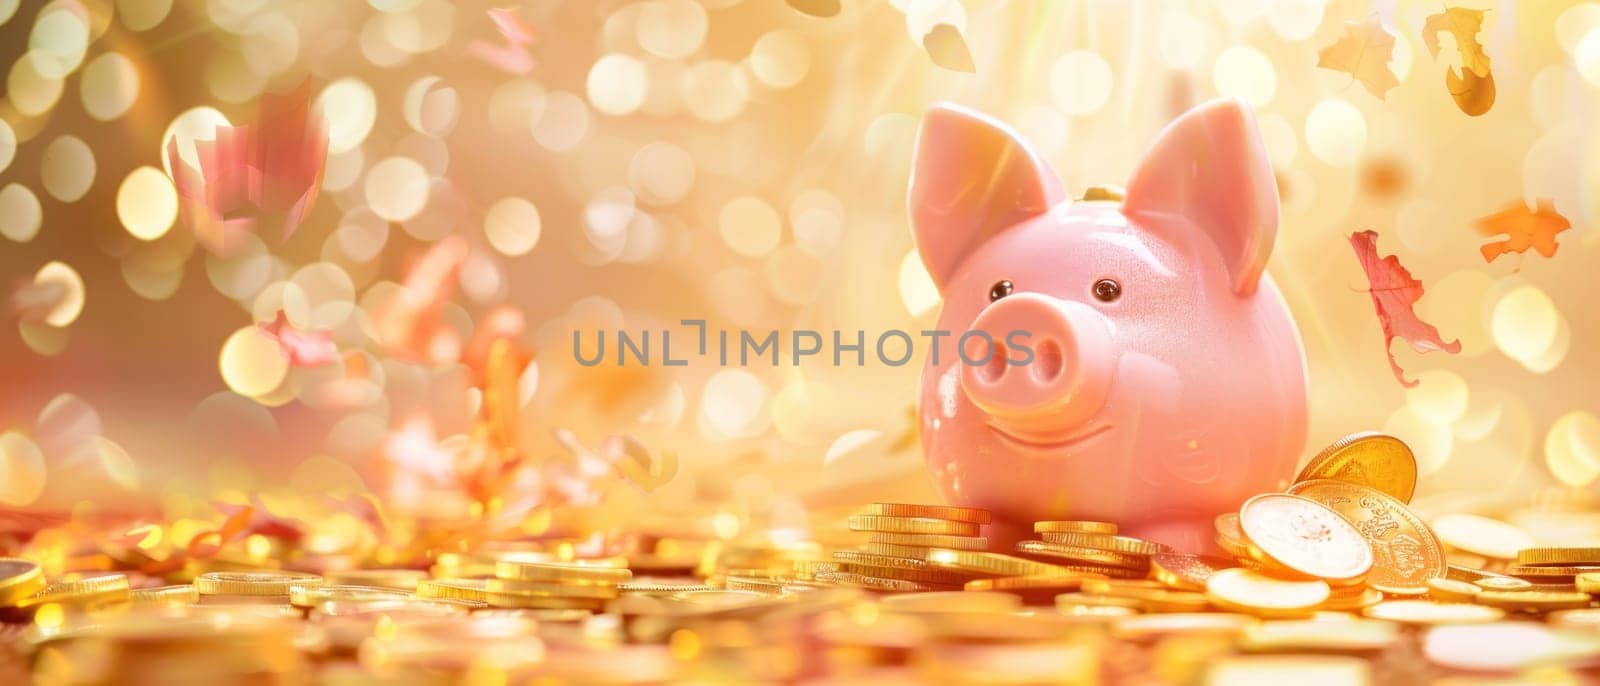 A pig is sitting on a pile of gold coins.